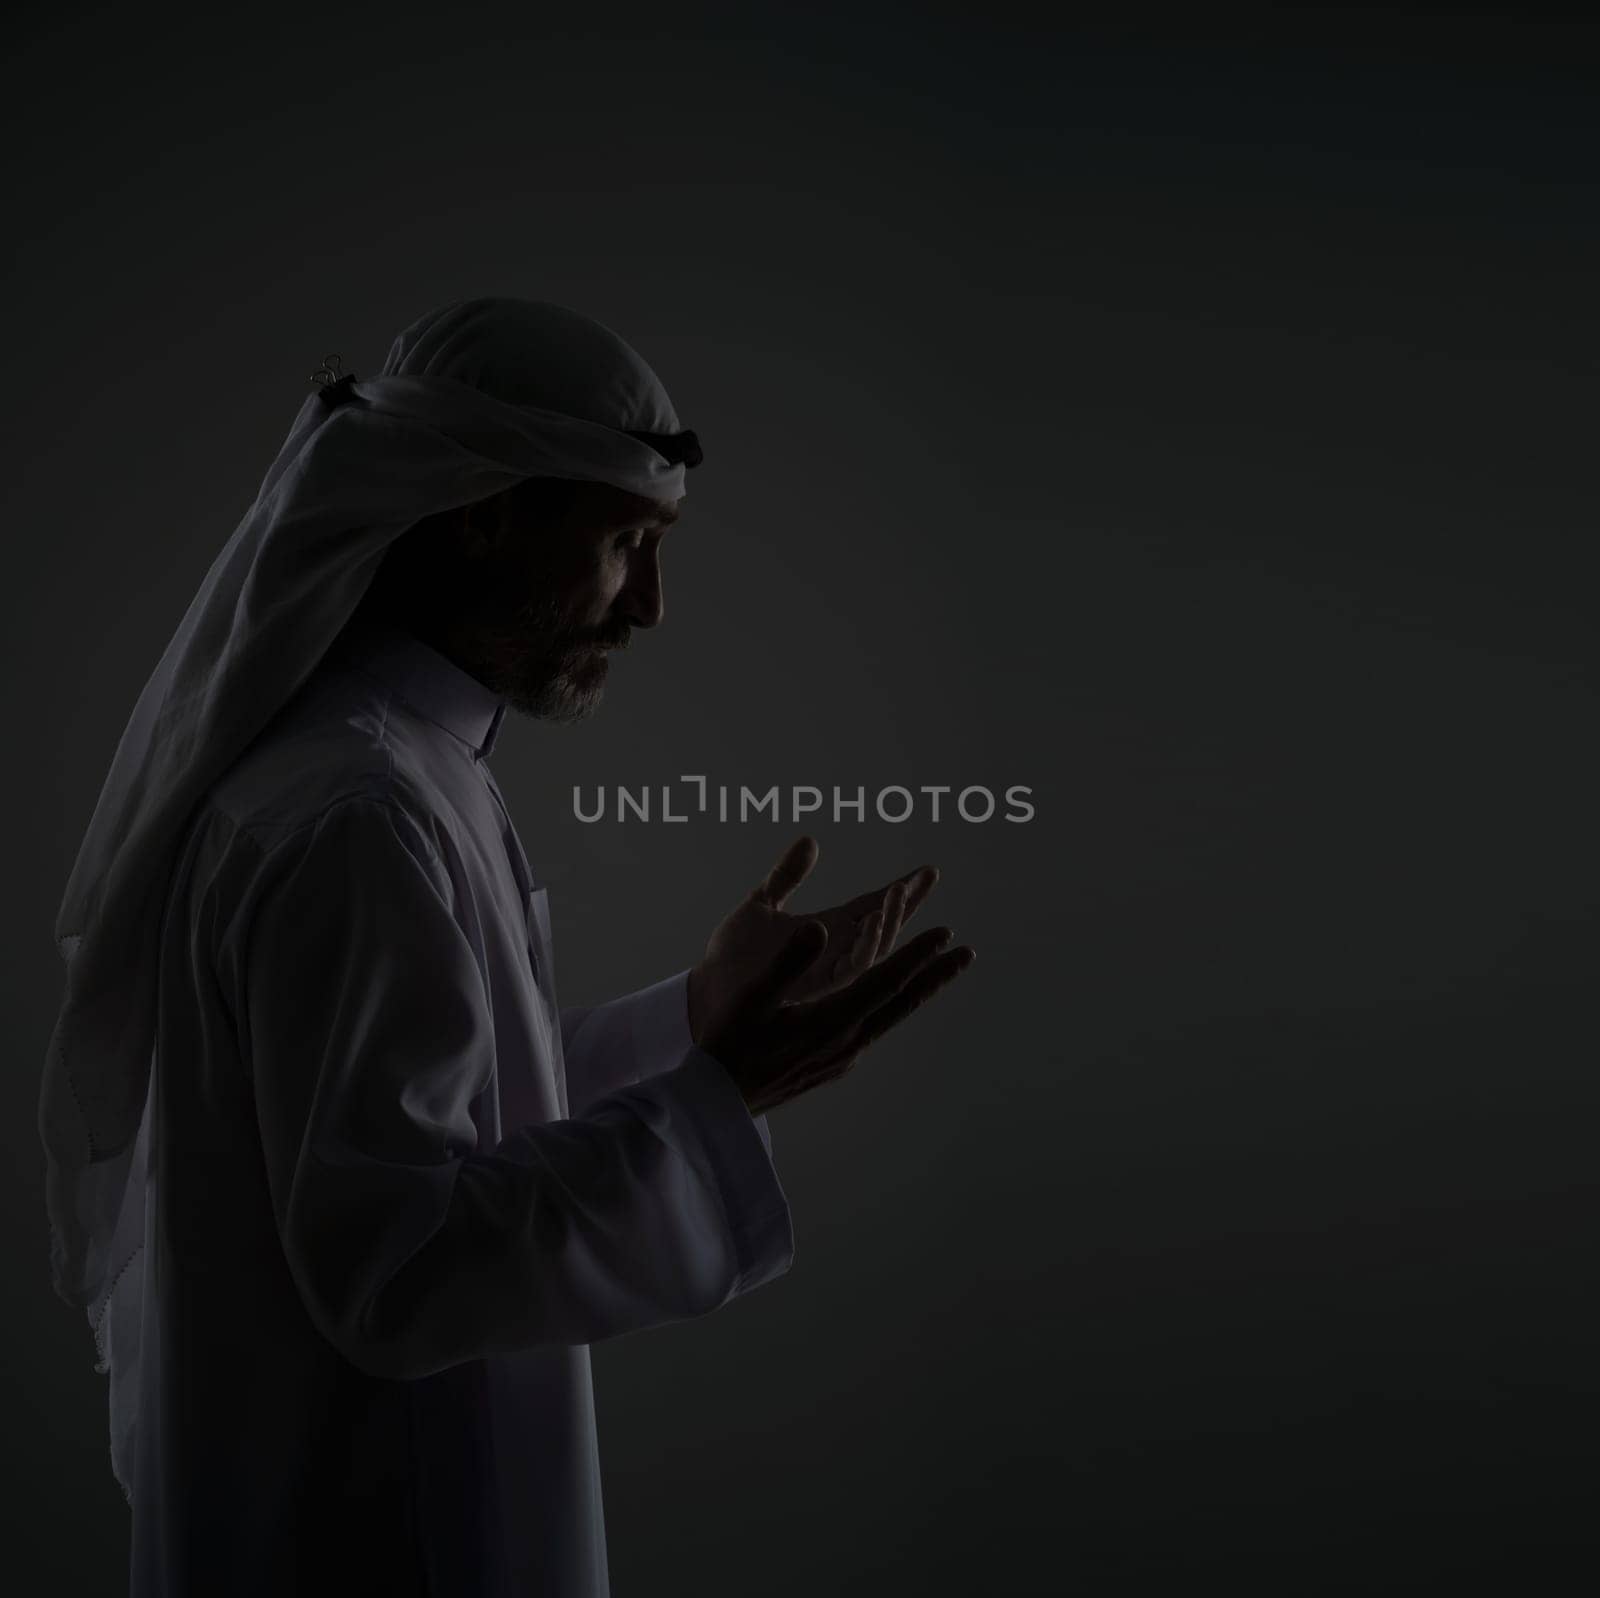 Muslim Arab man is prayer, raising hands to face with peaceful, serene expression. Copy space and portrays the man's devotion and spirituality in traditional Islamic context. Black and white portrait. High quality photo